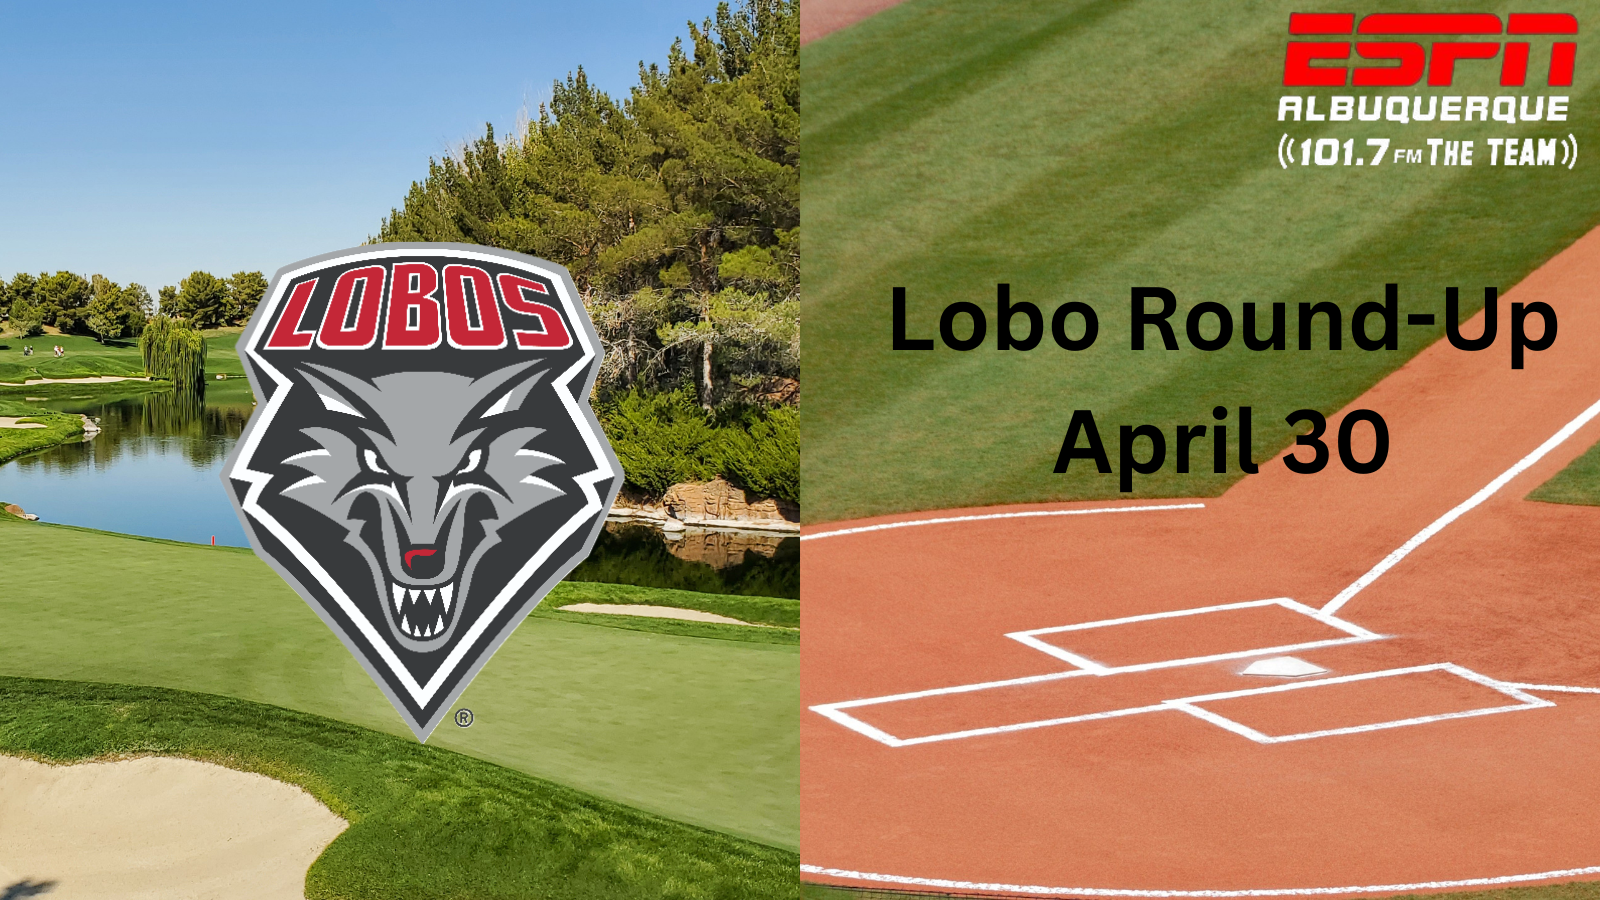 New Mexico Lobos: April Victories and Promising Futures